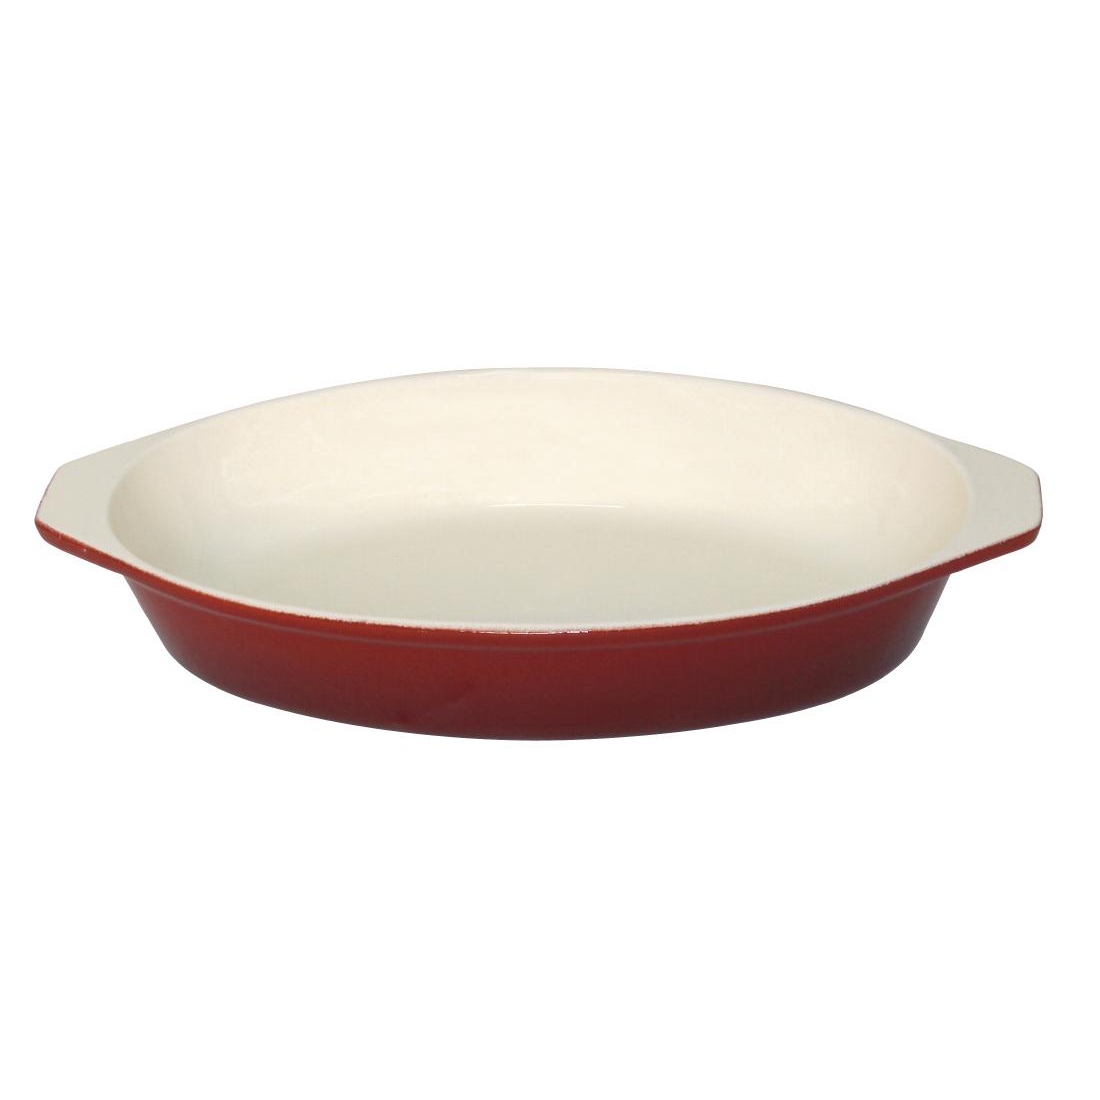 Vogue Red Oval Cast Iron Gratin Dish 650ml by Vogue-GH317 - Smart ...